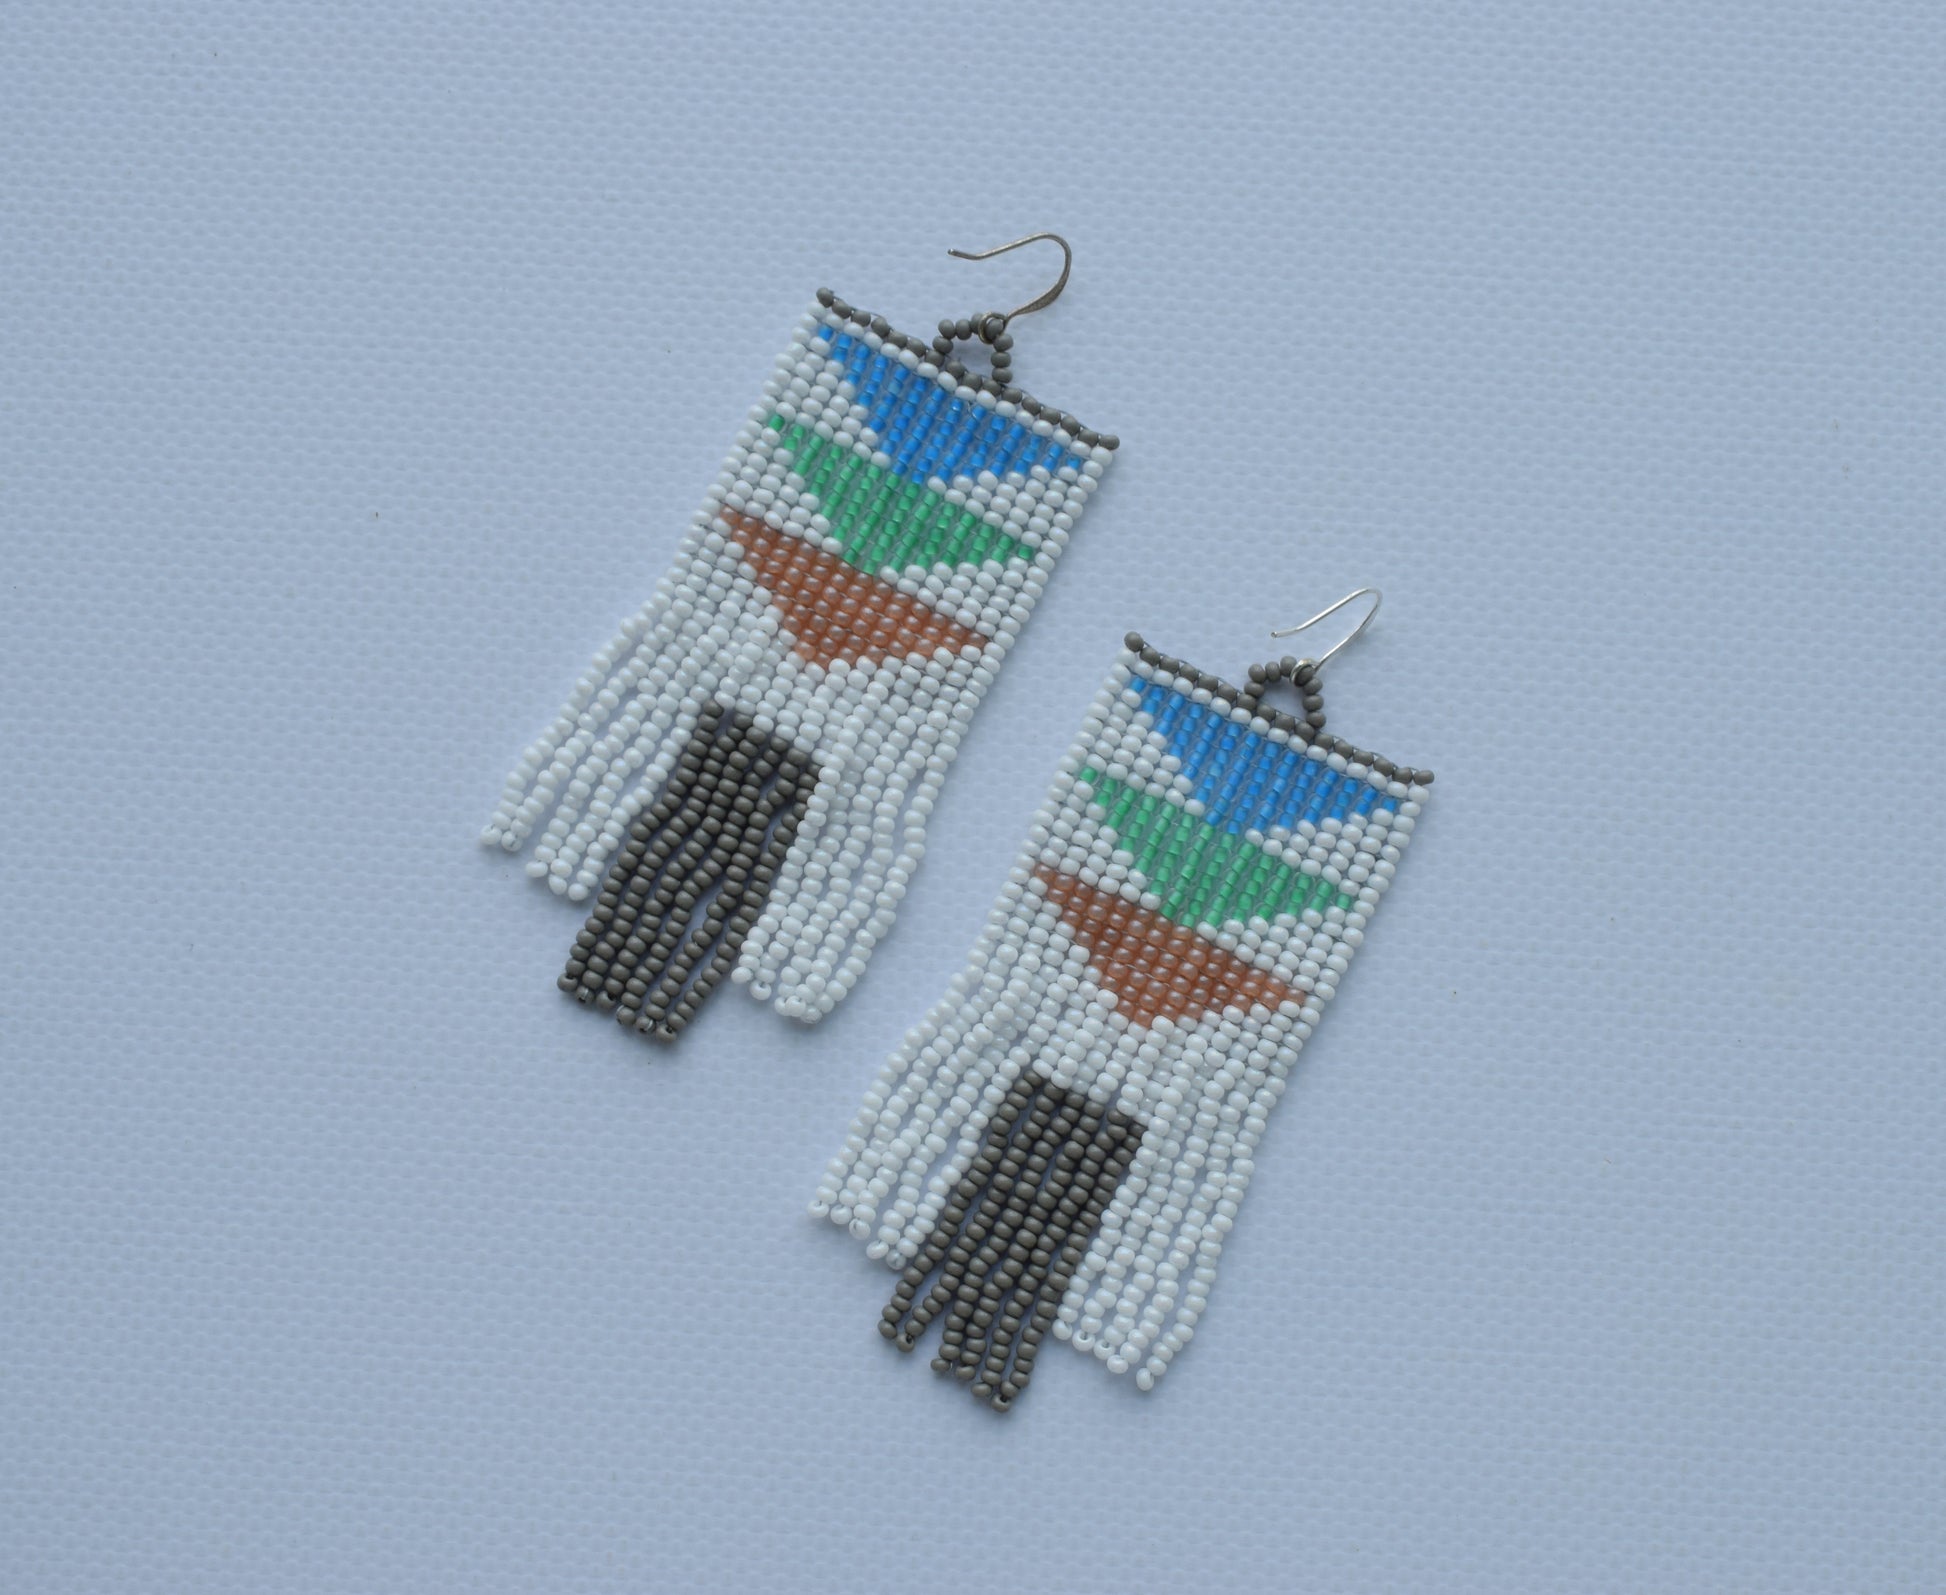 These are geometric beaded earrings. These beaded earrings are made of high-quality Czech beads. These earrings are lightweight, delicate, fashionable and highly versatile, suitable for everyday wear.  ONLY ONE PAIR  Length (*with hooks) - 9.2 cm (3.6 inches). Width - 3.6 cm (1.4 inches)  If you have any questions just write me a message. I am always in touch and reply asap!